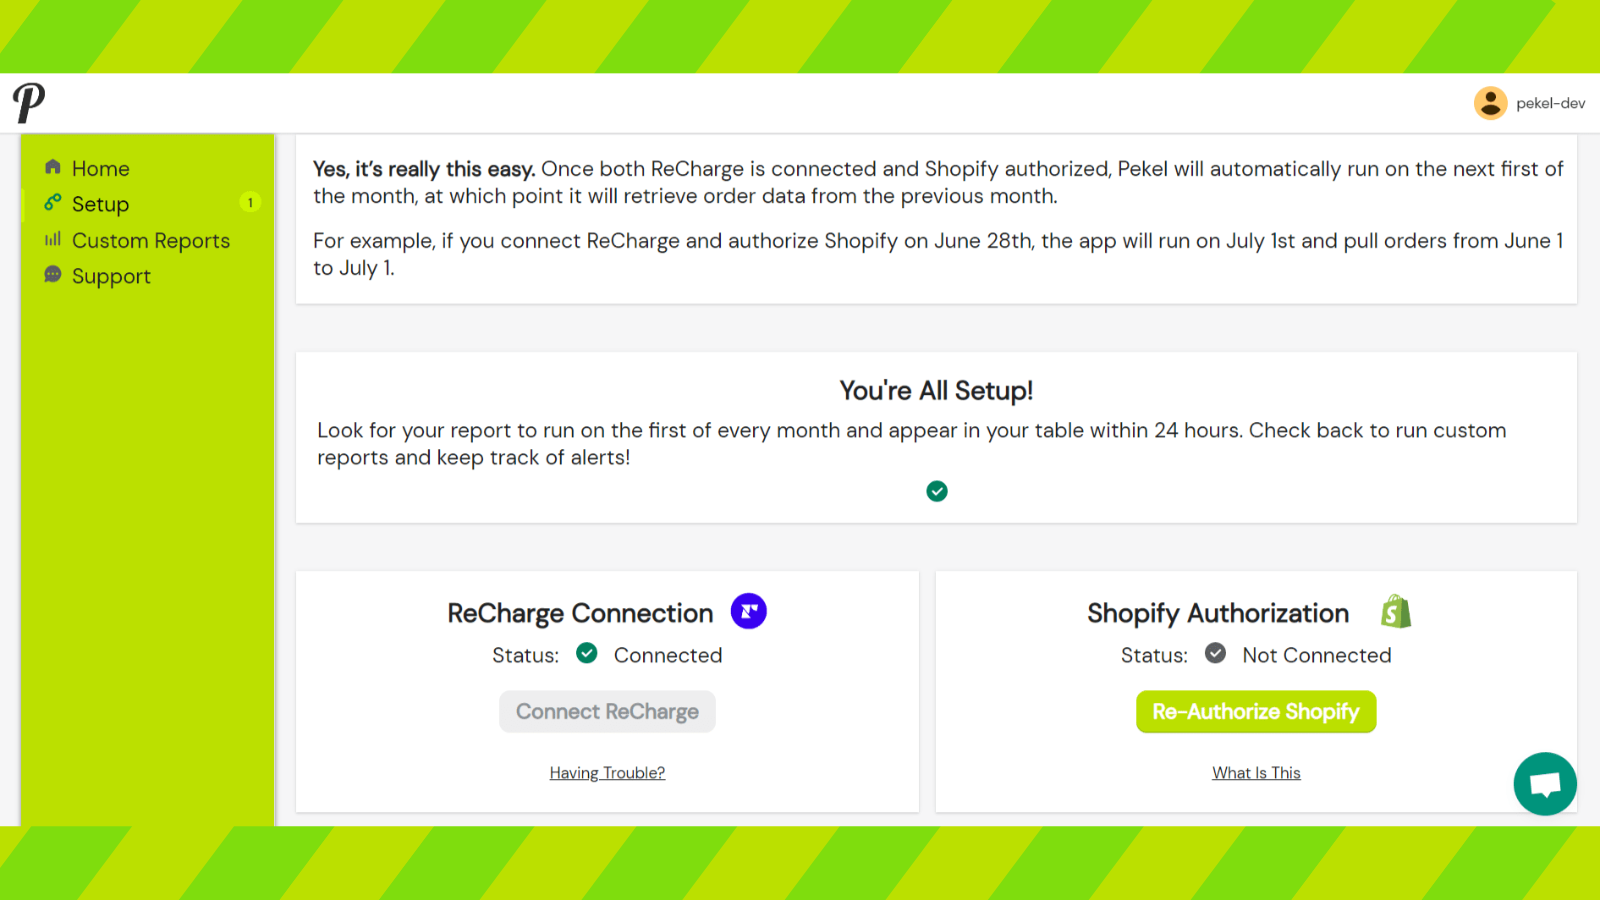 Setup page with ReCharge and Shopify Connections